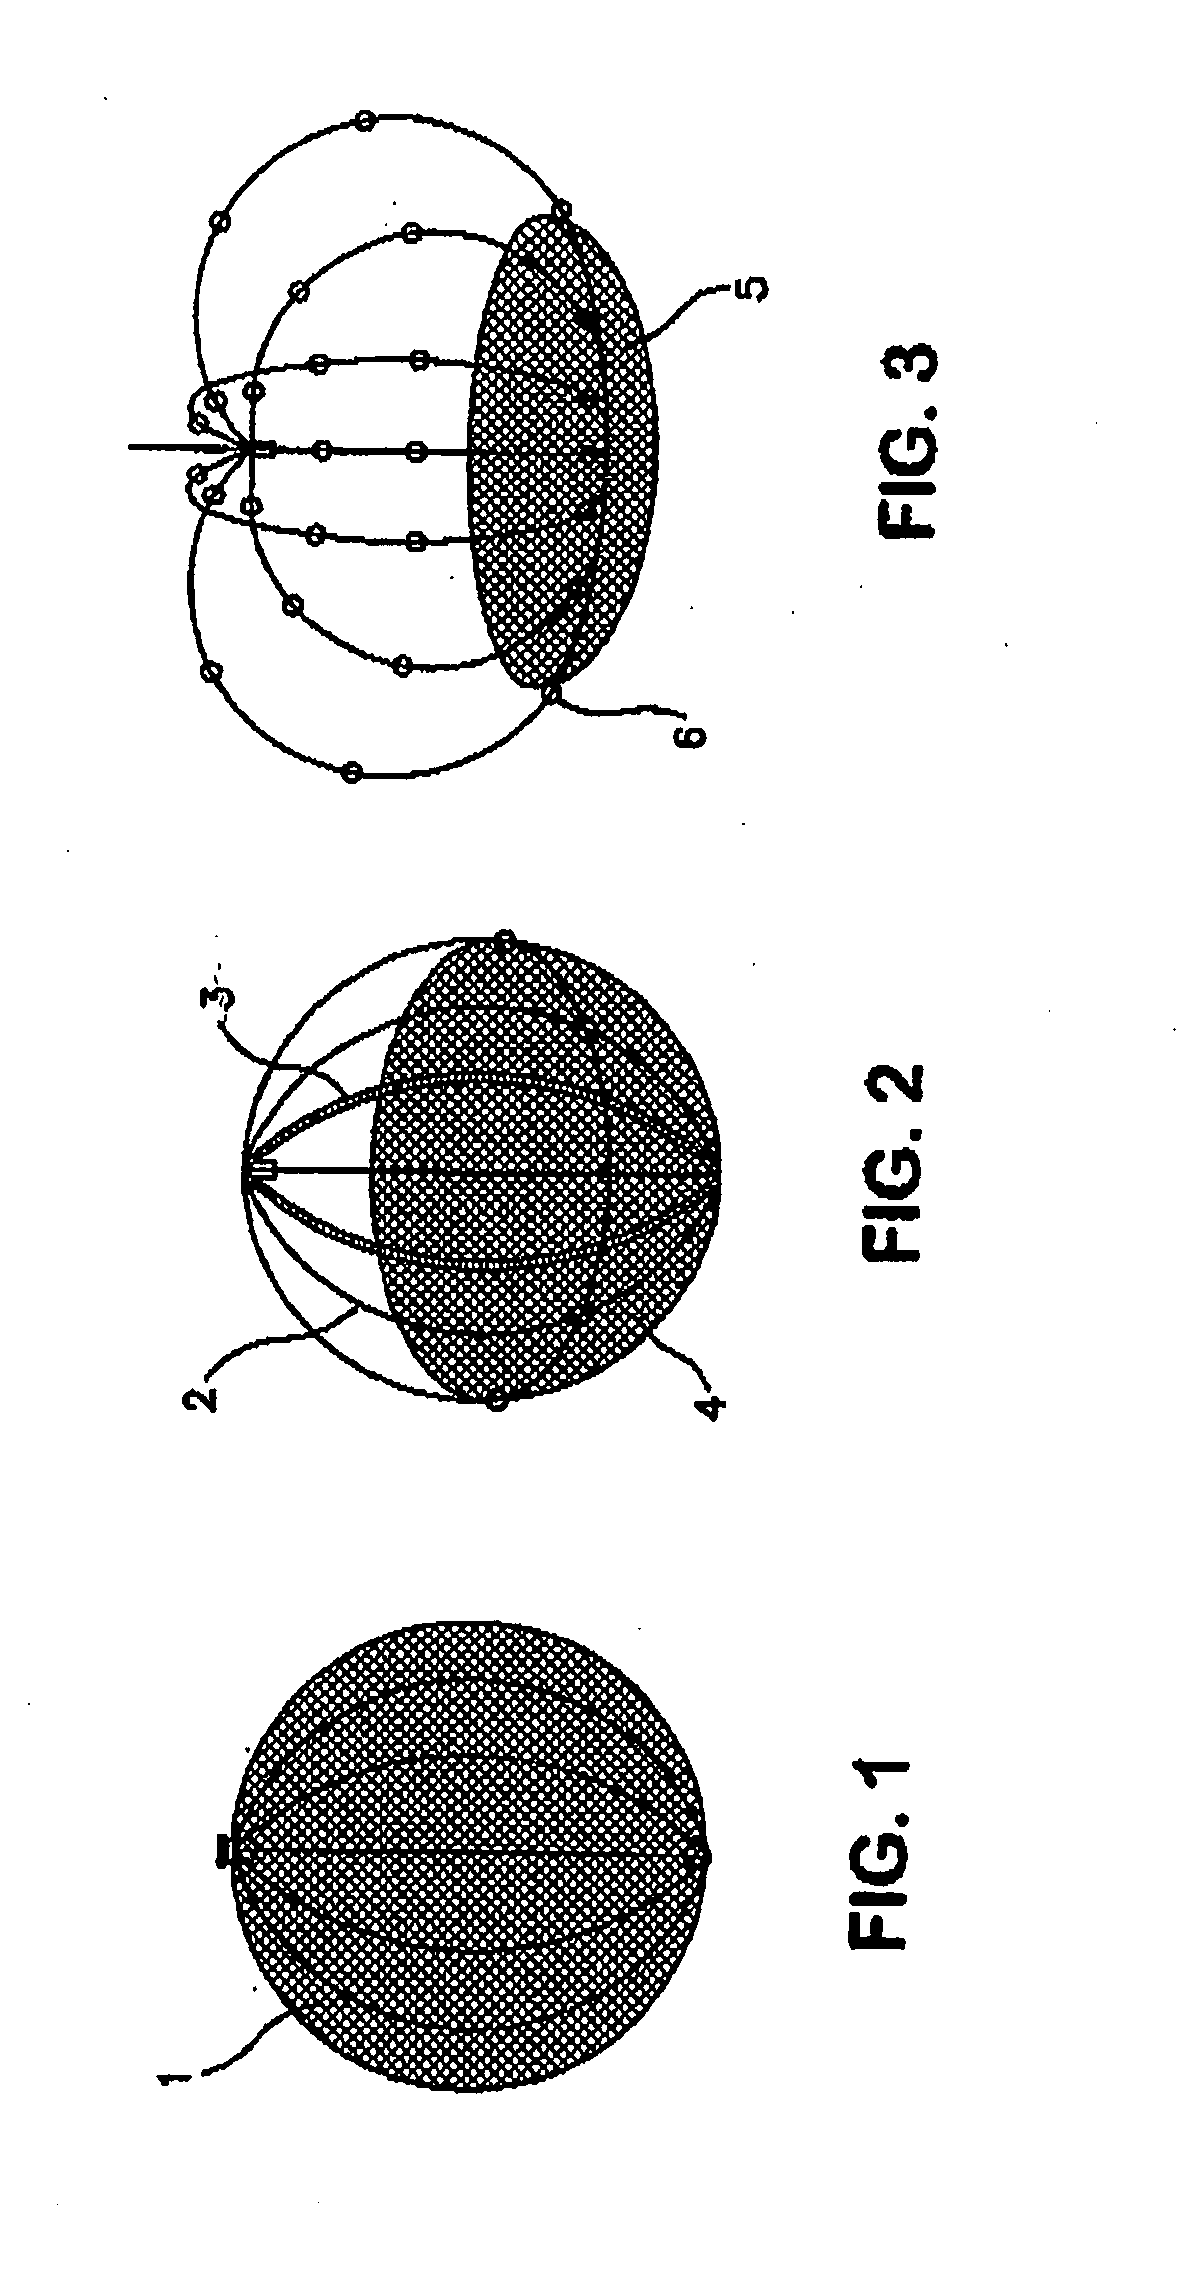 Self-Expandable Endovascular Device For Aneurysm Occlusion